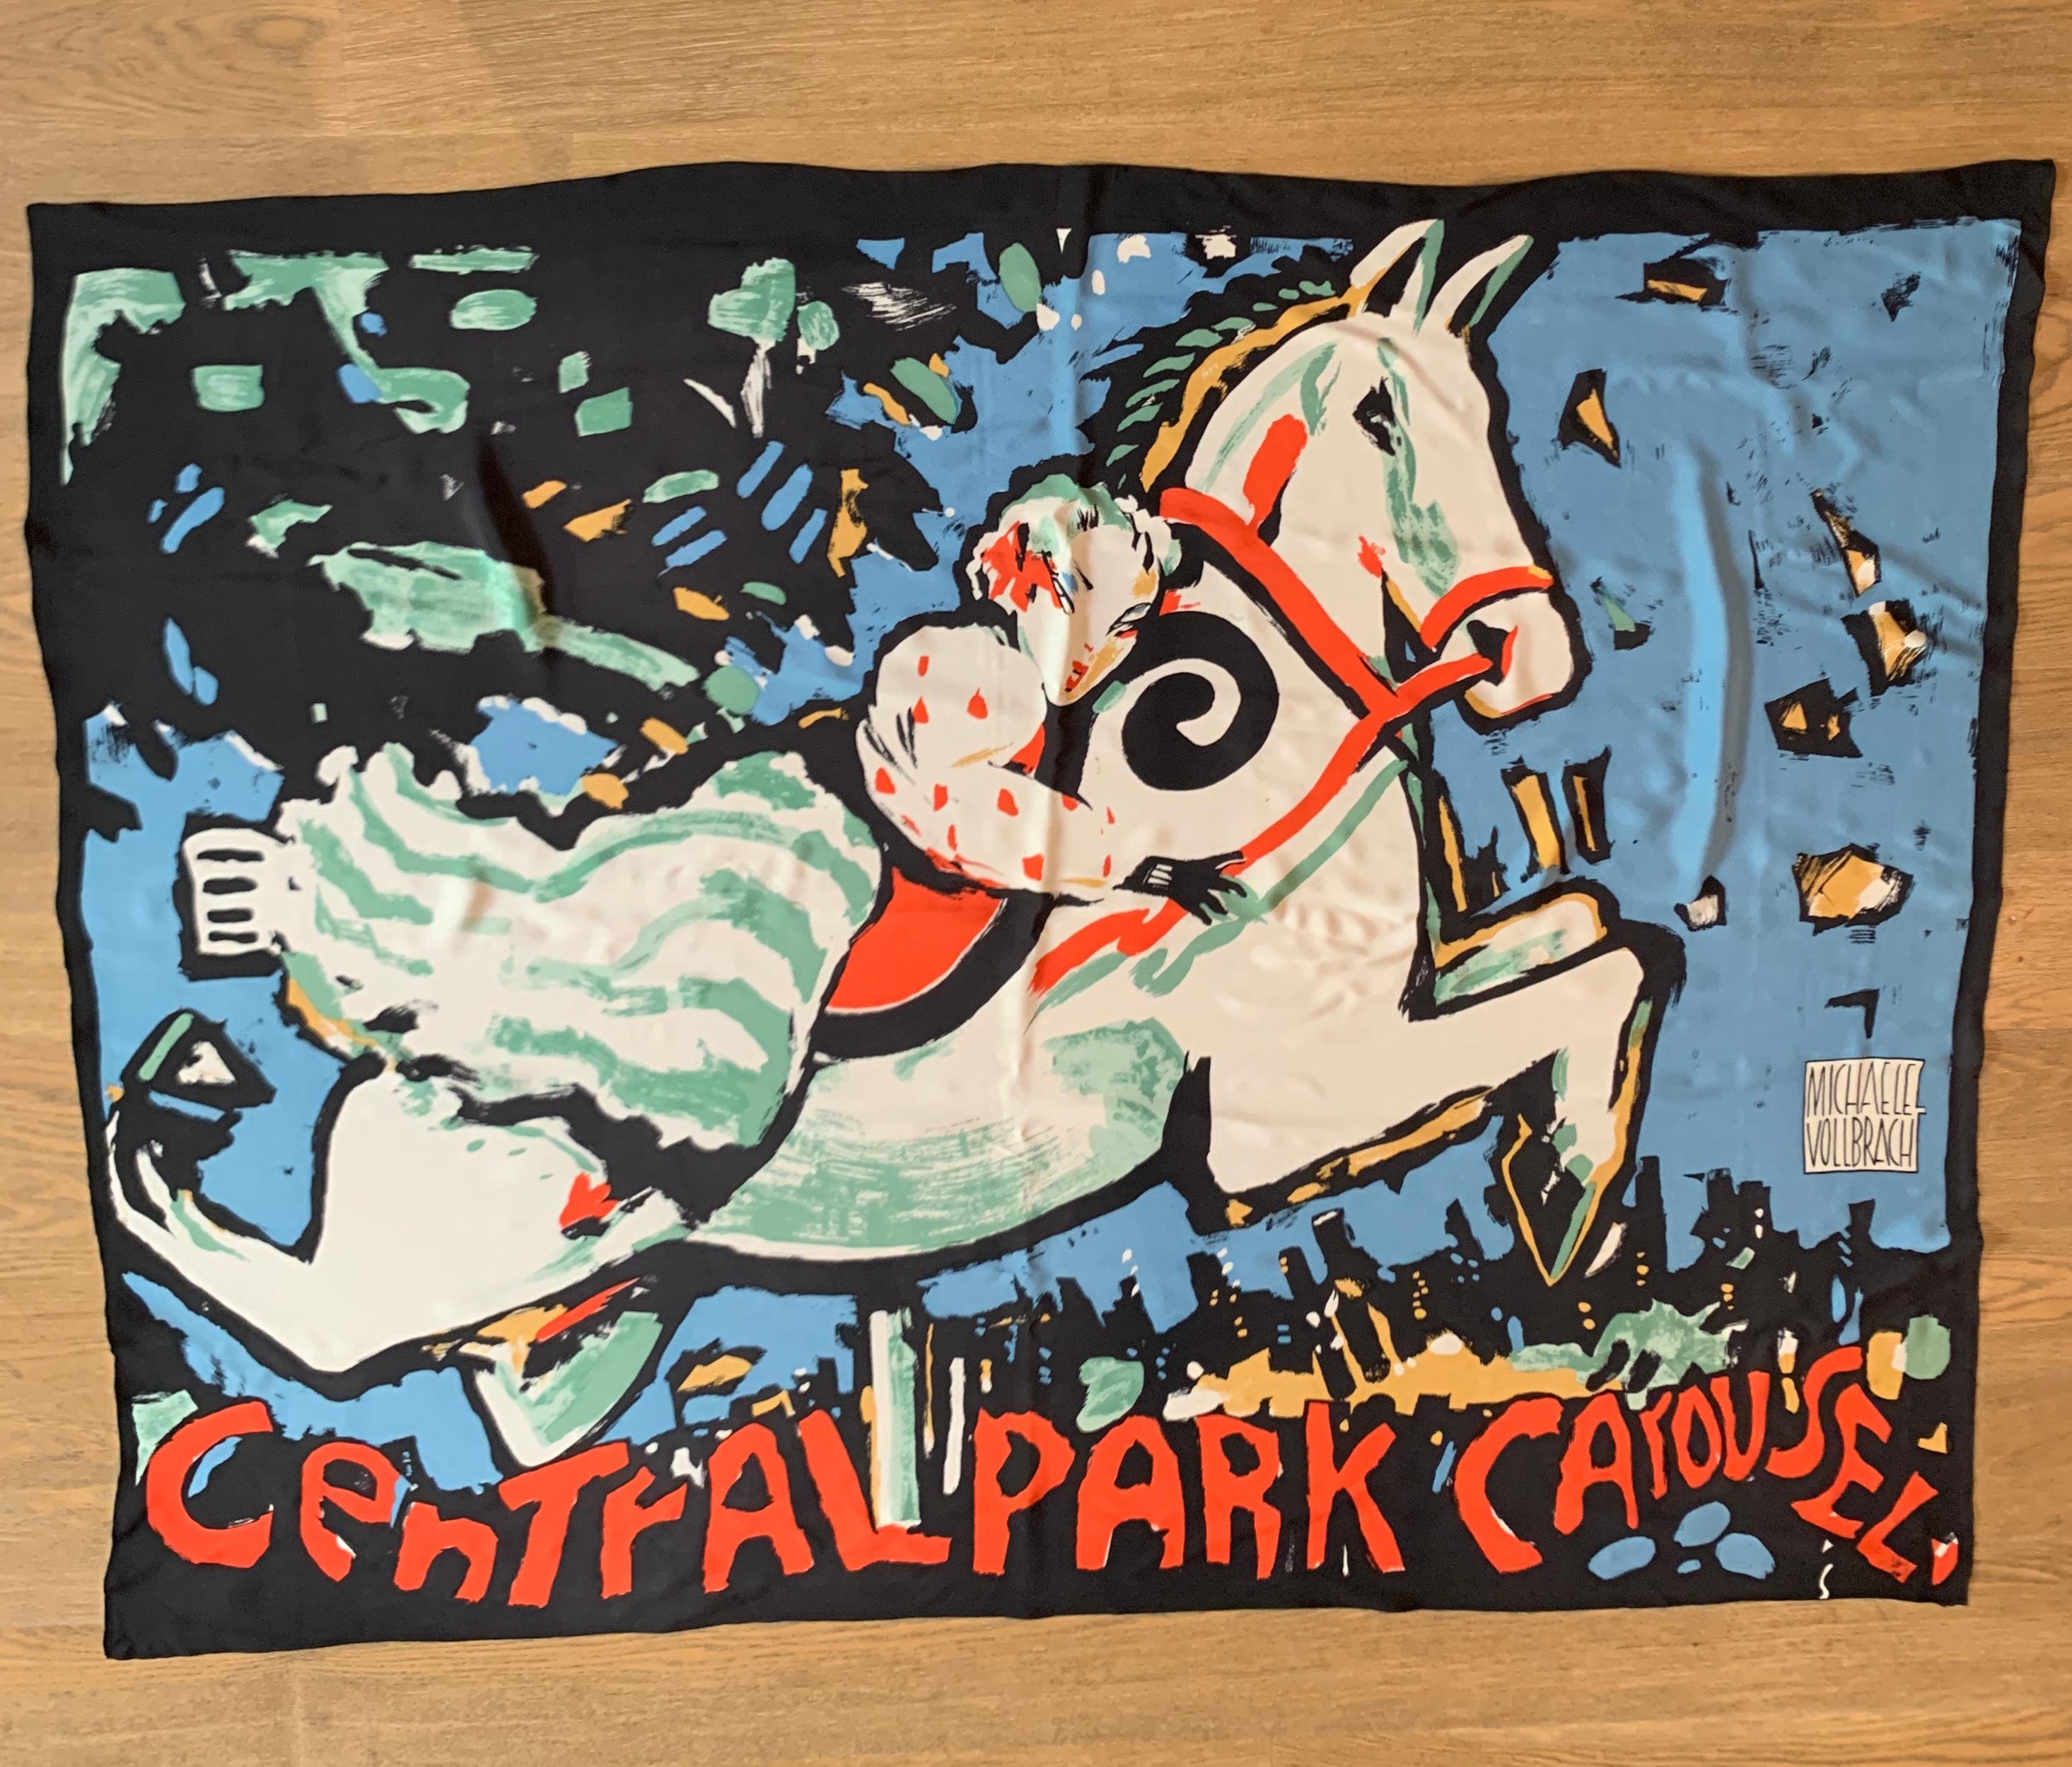 Stunning and super large Michaele Vollbracht silk scarf featuring a rider on the Central Park Carousel. Glue, green, tan, and red on white and black print showcases Vollbracht's painterly style. Reads 